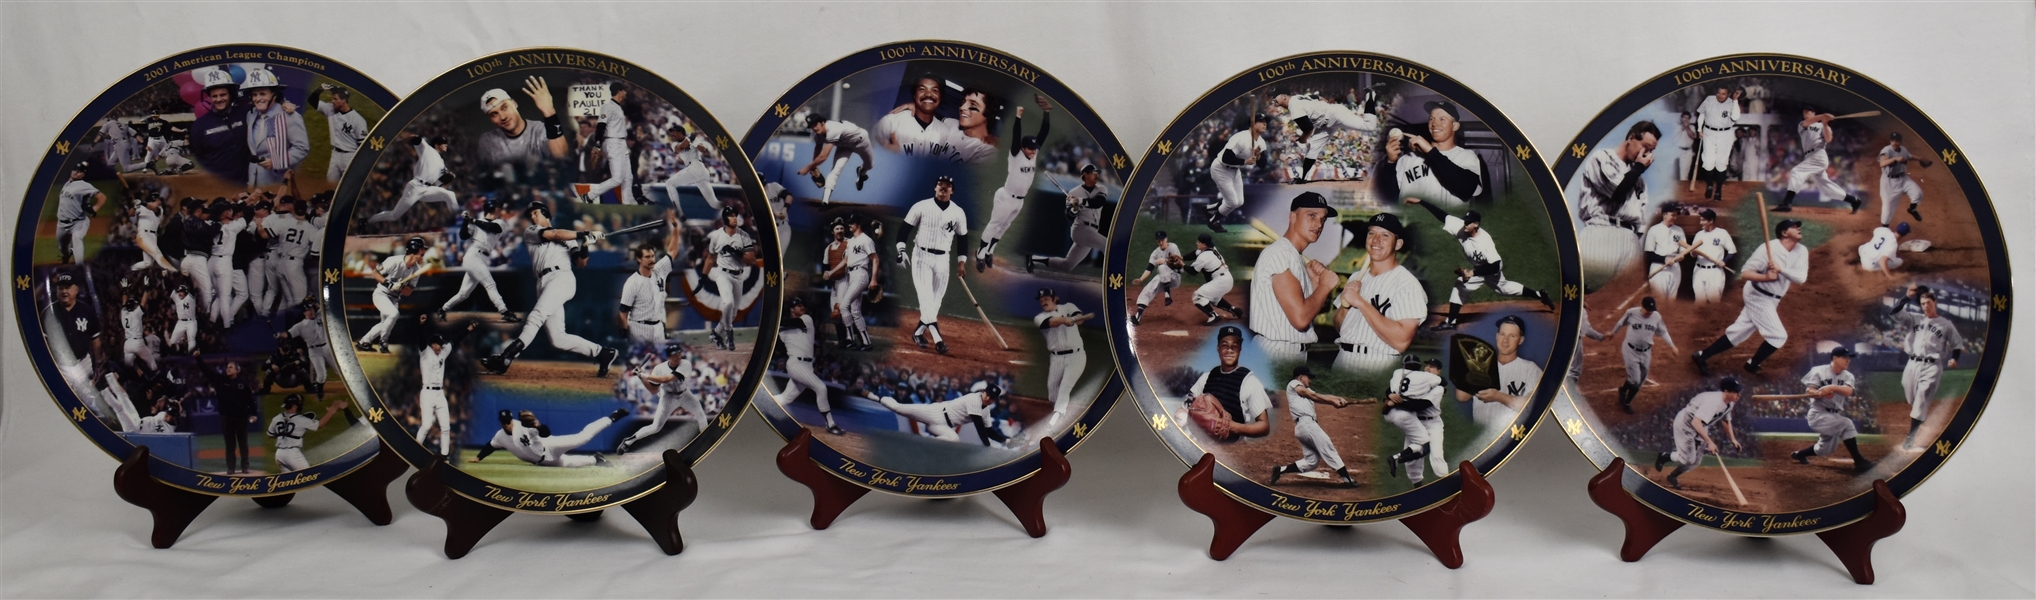 Danbury Mint 100th Anniversary Set of 5 New York Yankee Collector Plates w/Stands  